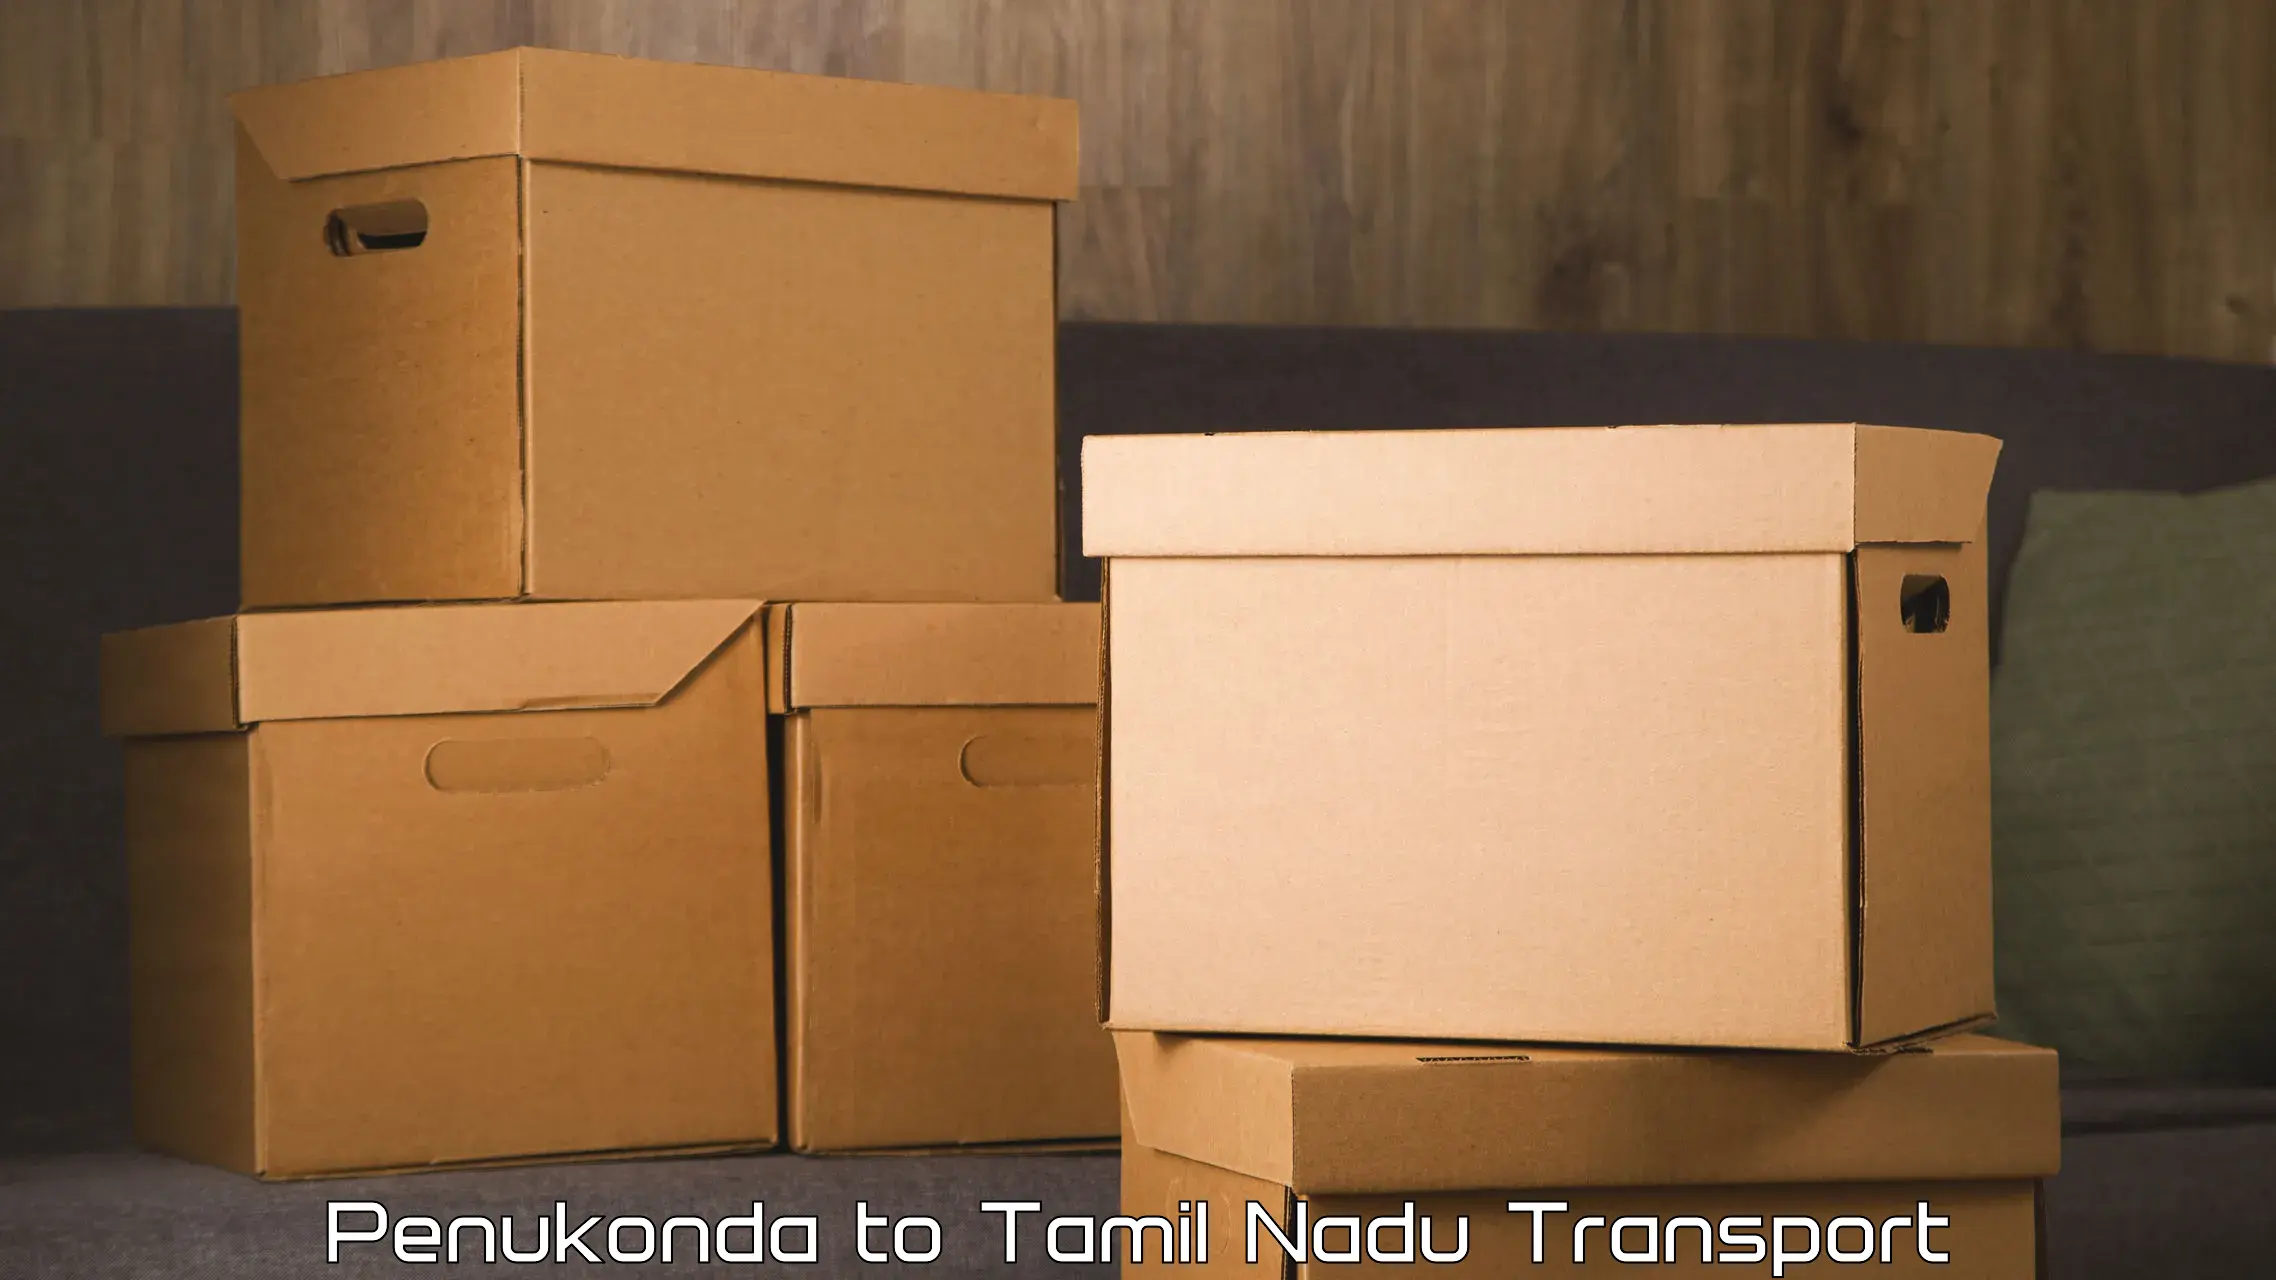 Transport bike from one state to another Penukonda to Tamil Nadu